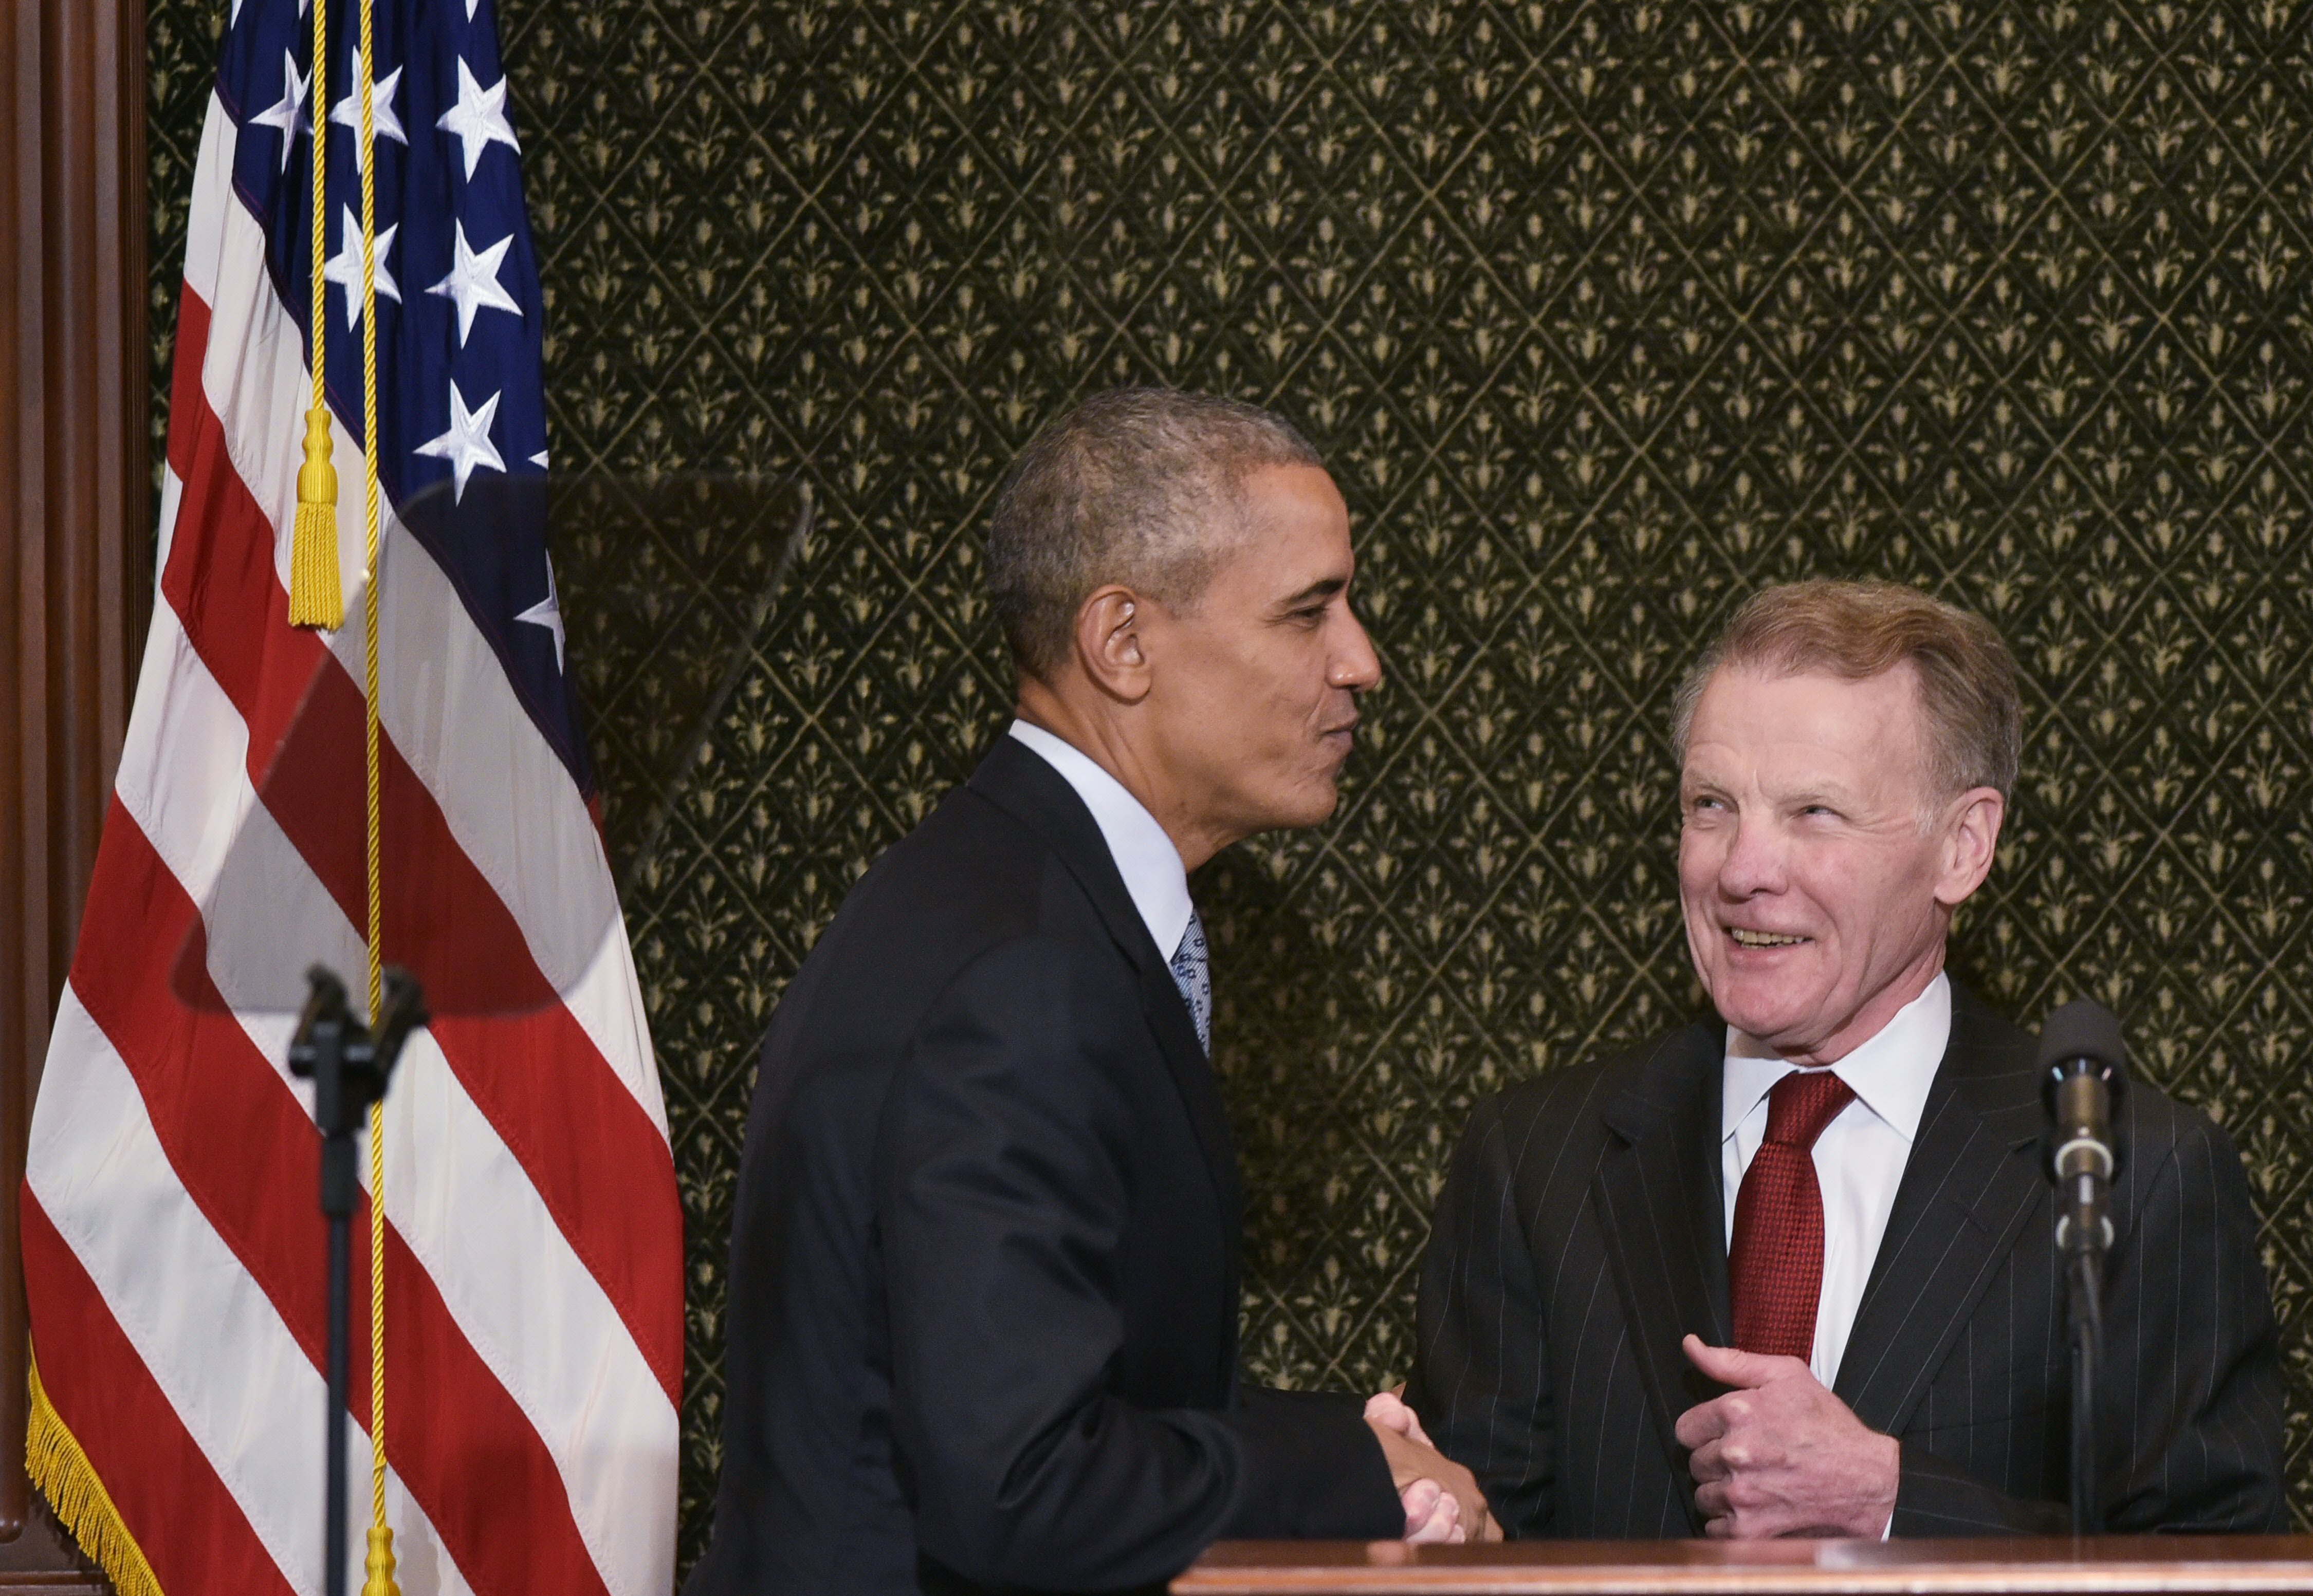 US President Barack Obama shakes hands with Illinois House Speaker Michael Madigan as he arrives to address the Illinois General Assembly at the Illinois State Capitol in Springfield, Illinois on February 10, 2016. (MANDEL NGAN/AFP/Getty Images)